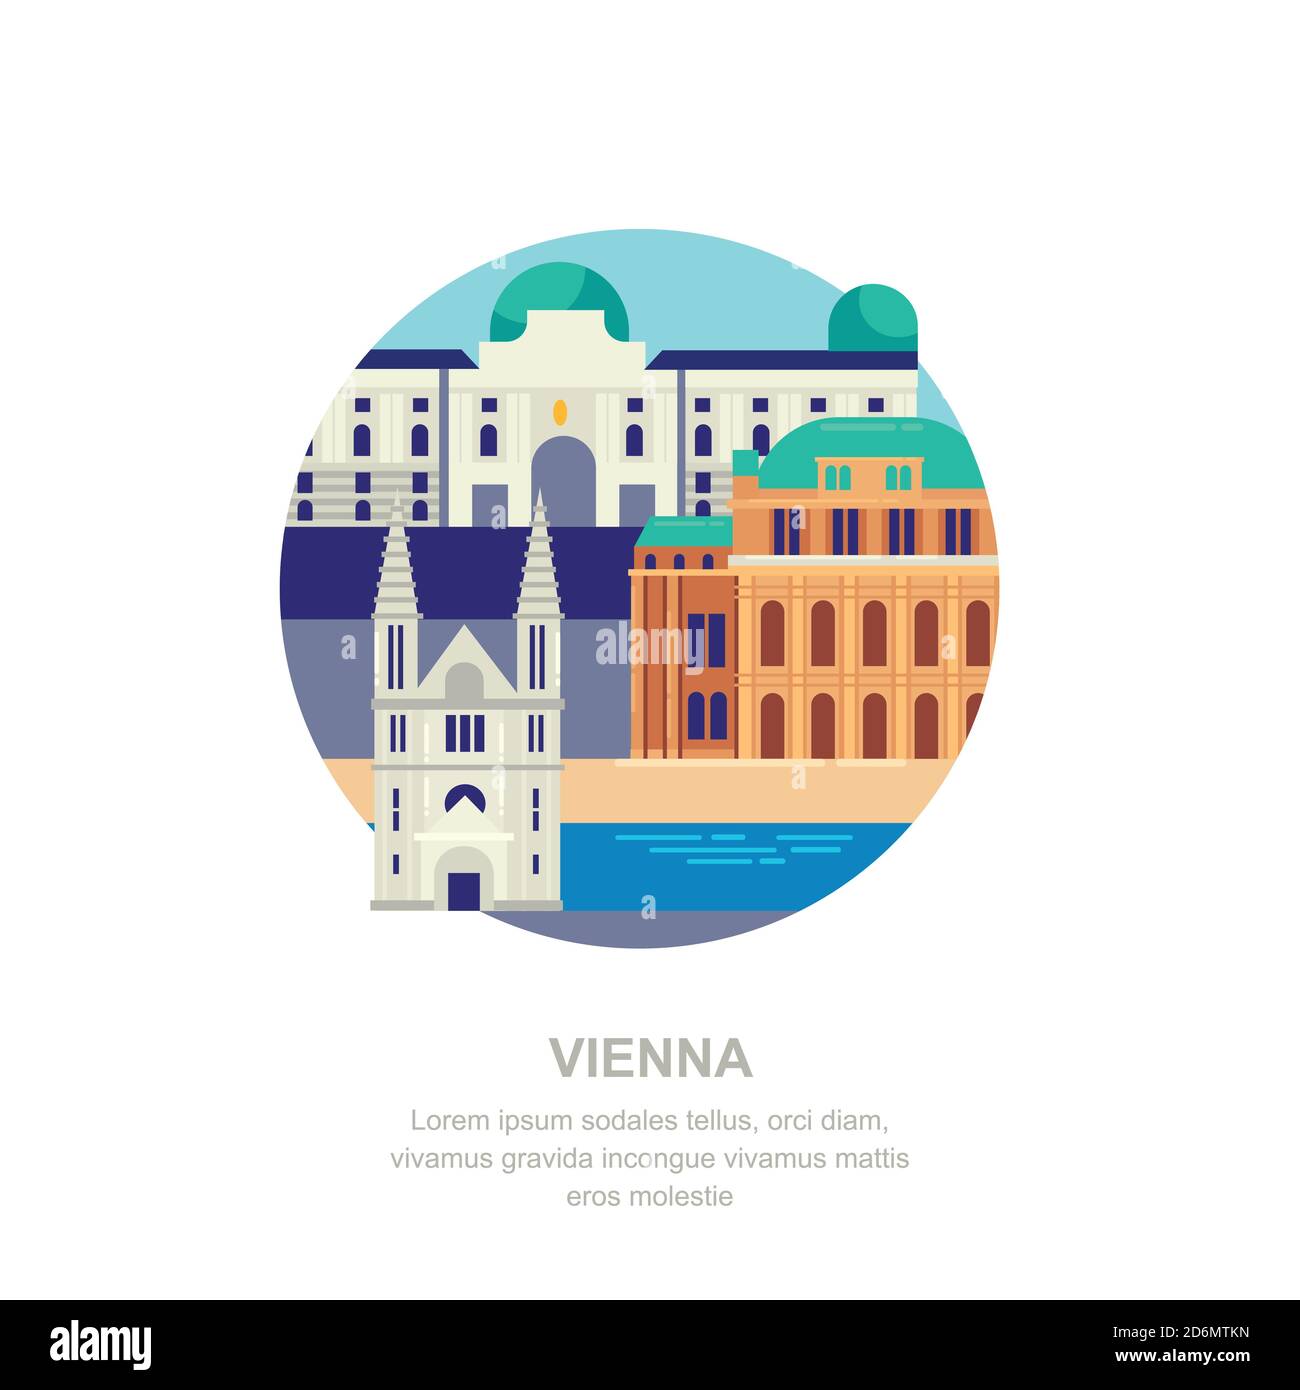 Travel to Austria vector flat illustration. Vienna city symbols and touristic landmarks. City building icons and design elements. Stock Vector